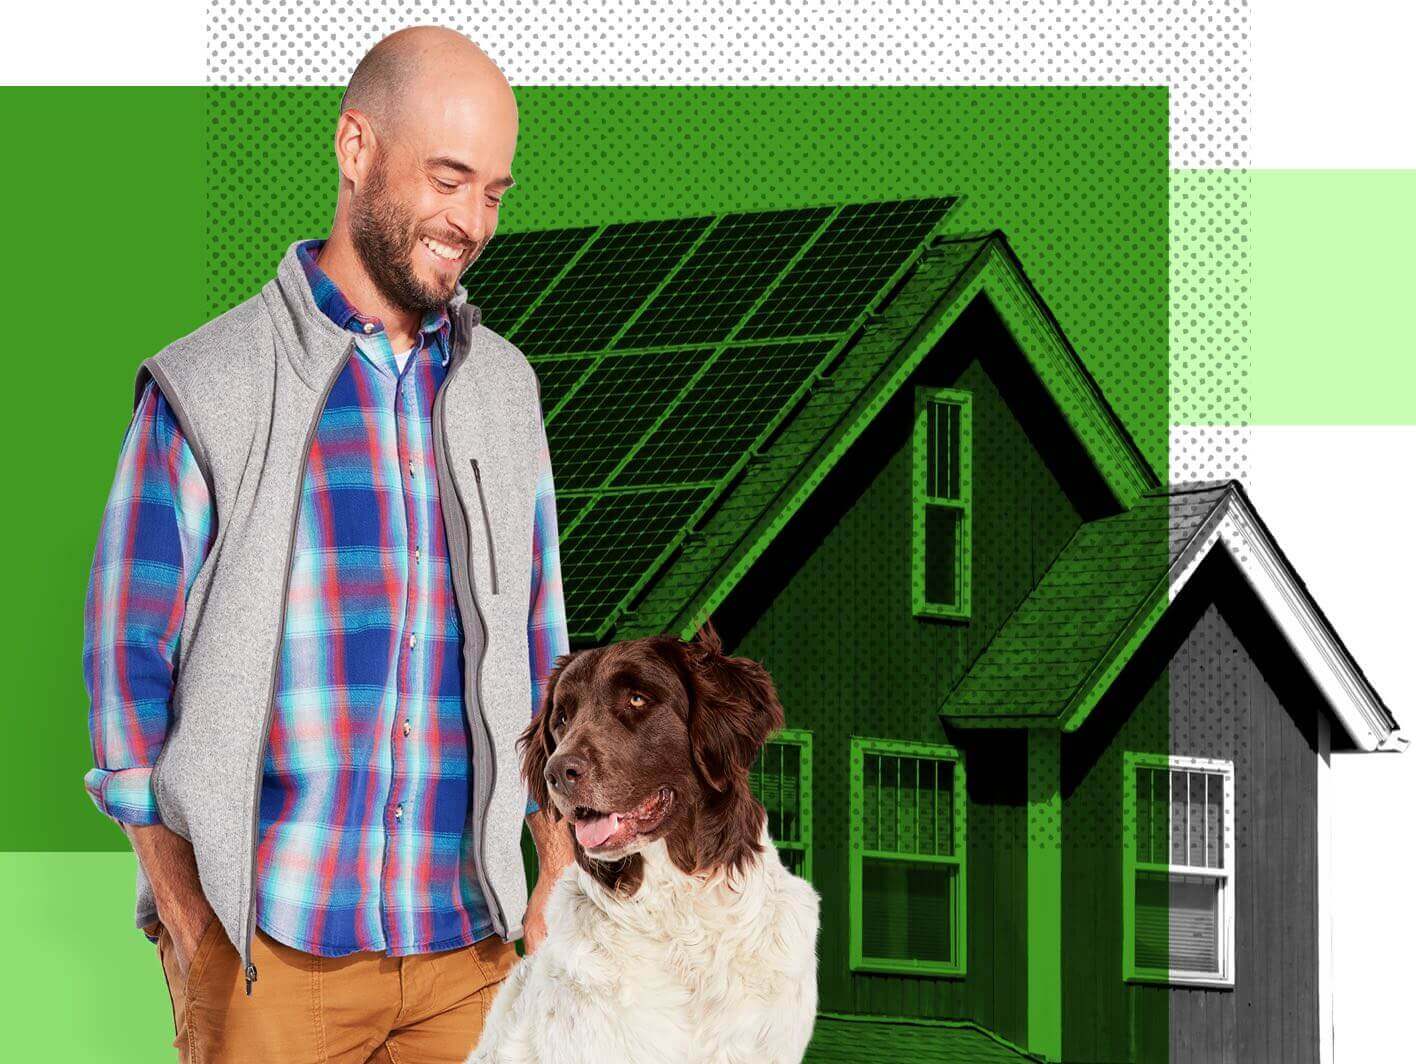 Jake, an Affinity Plus member, in front of a home with solar panels